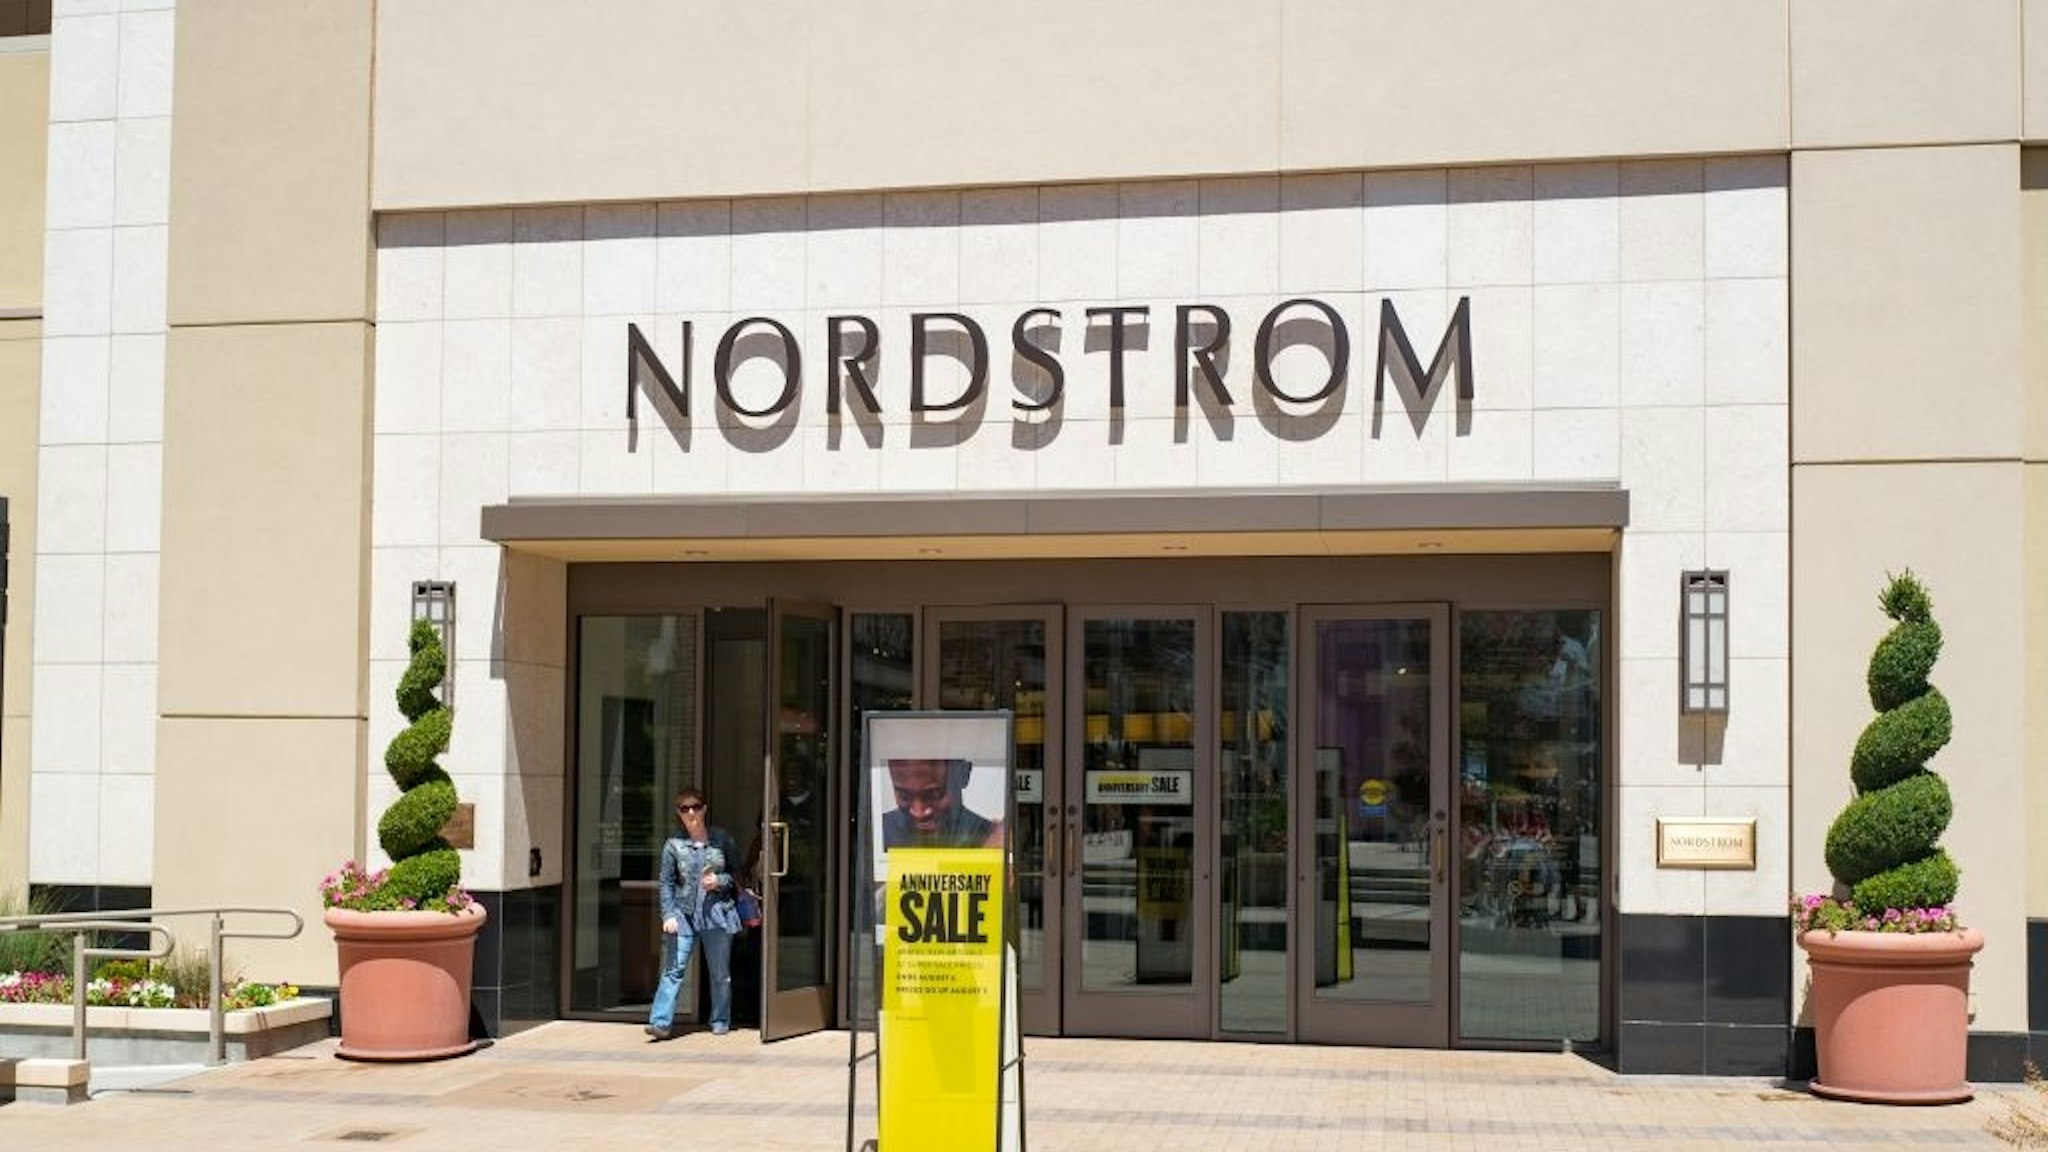 Nordstrom department store, with logo and signage, in the upscale Broadway Plaza shopping center in downtown Walnut Creek, California, July 30, 2017.